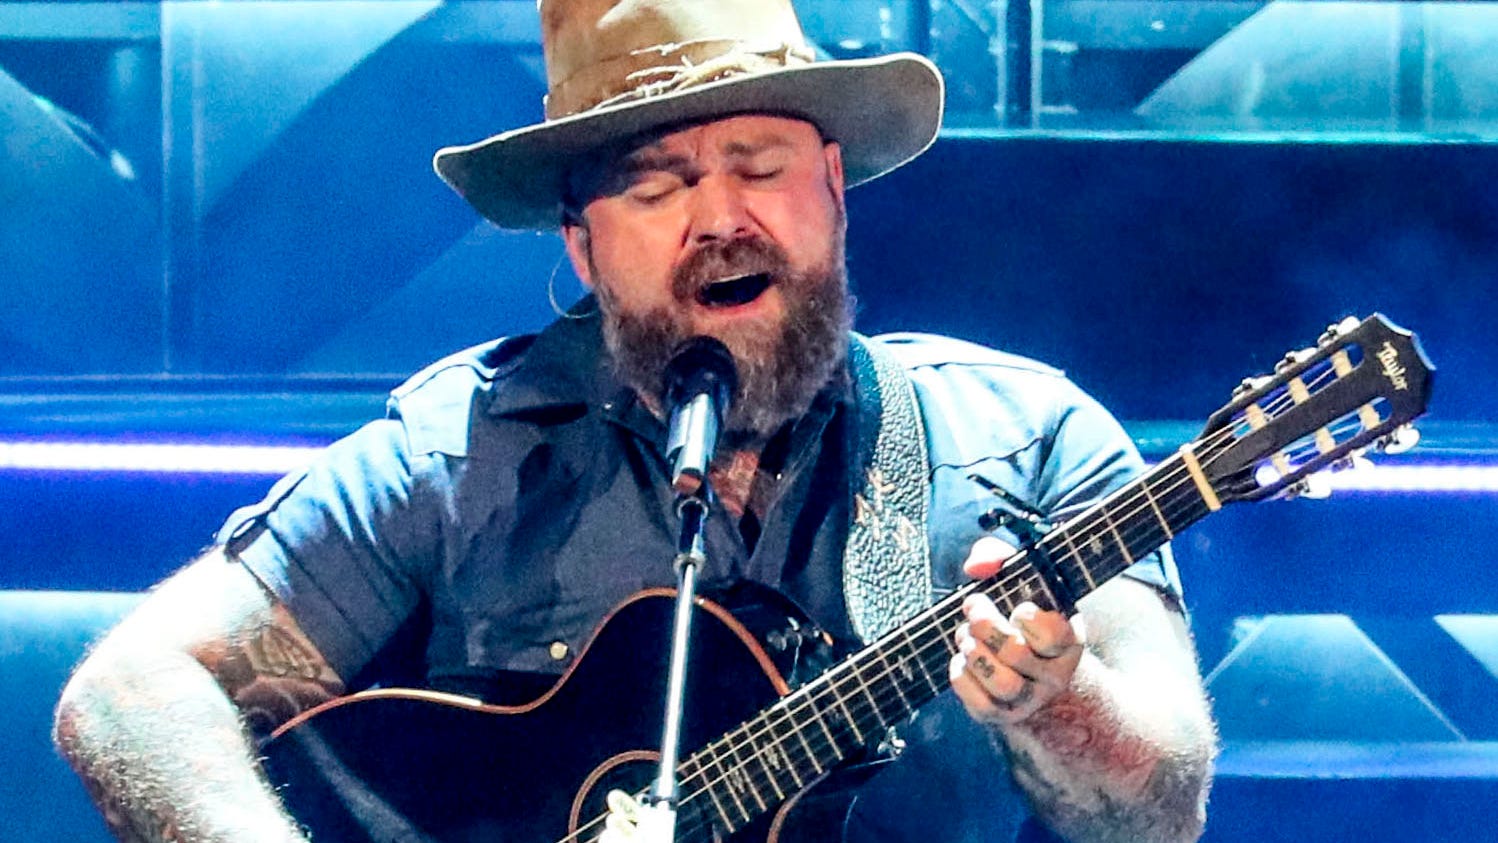 Summerfest in Milwaukee announces first headliner for its 55th year: Zac Brown Band